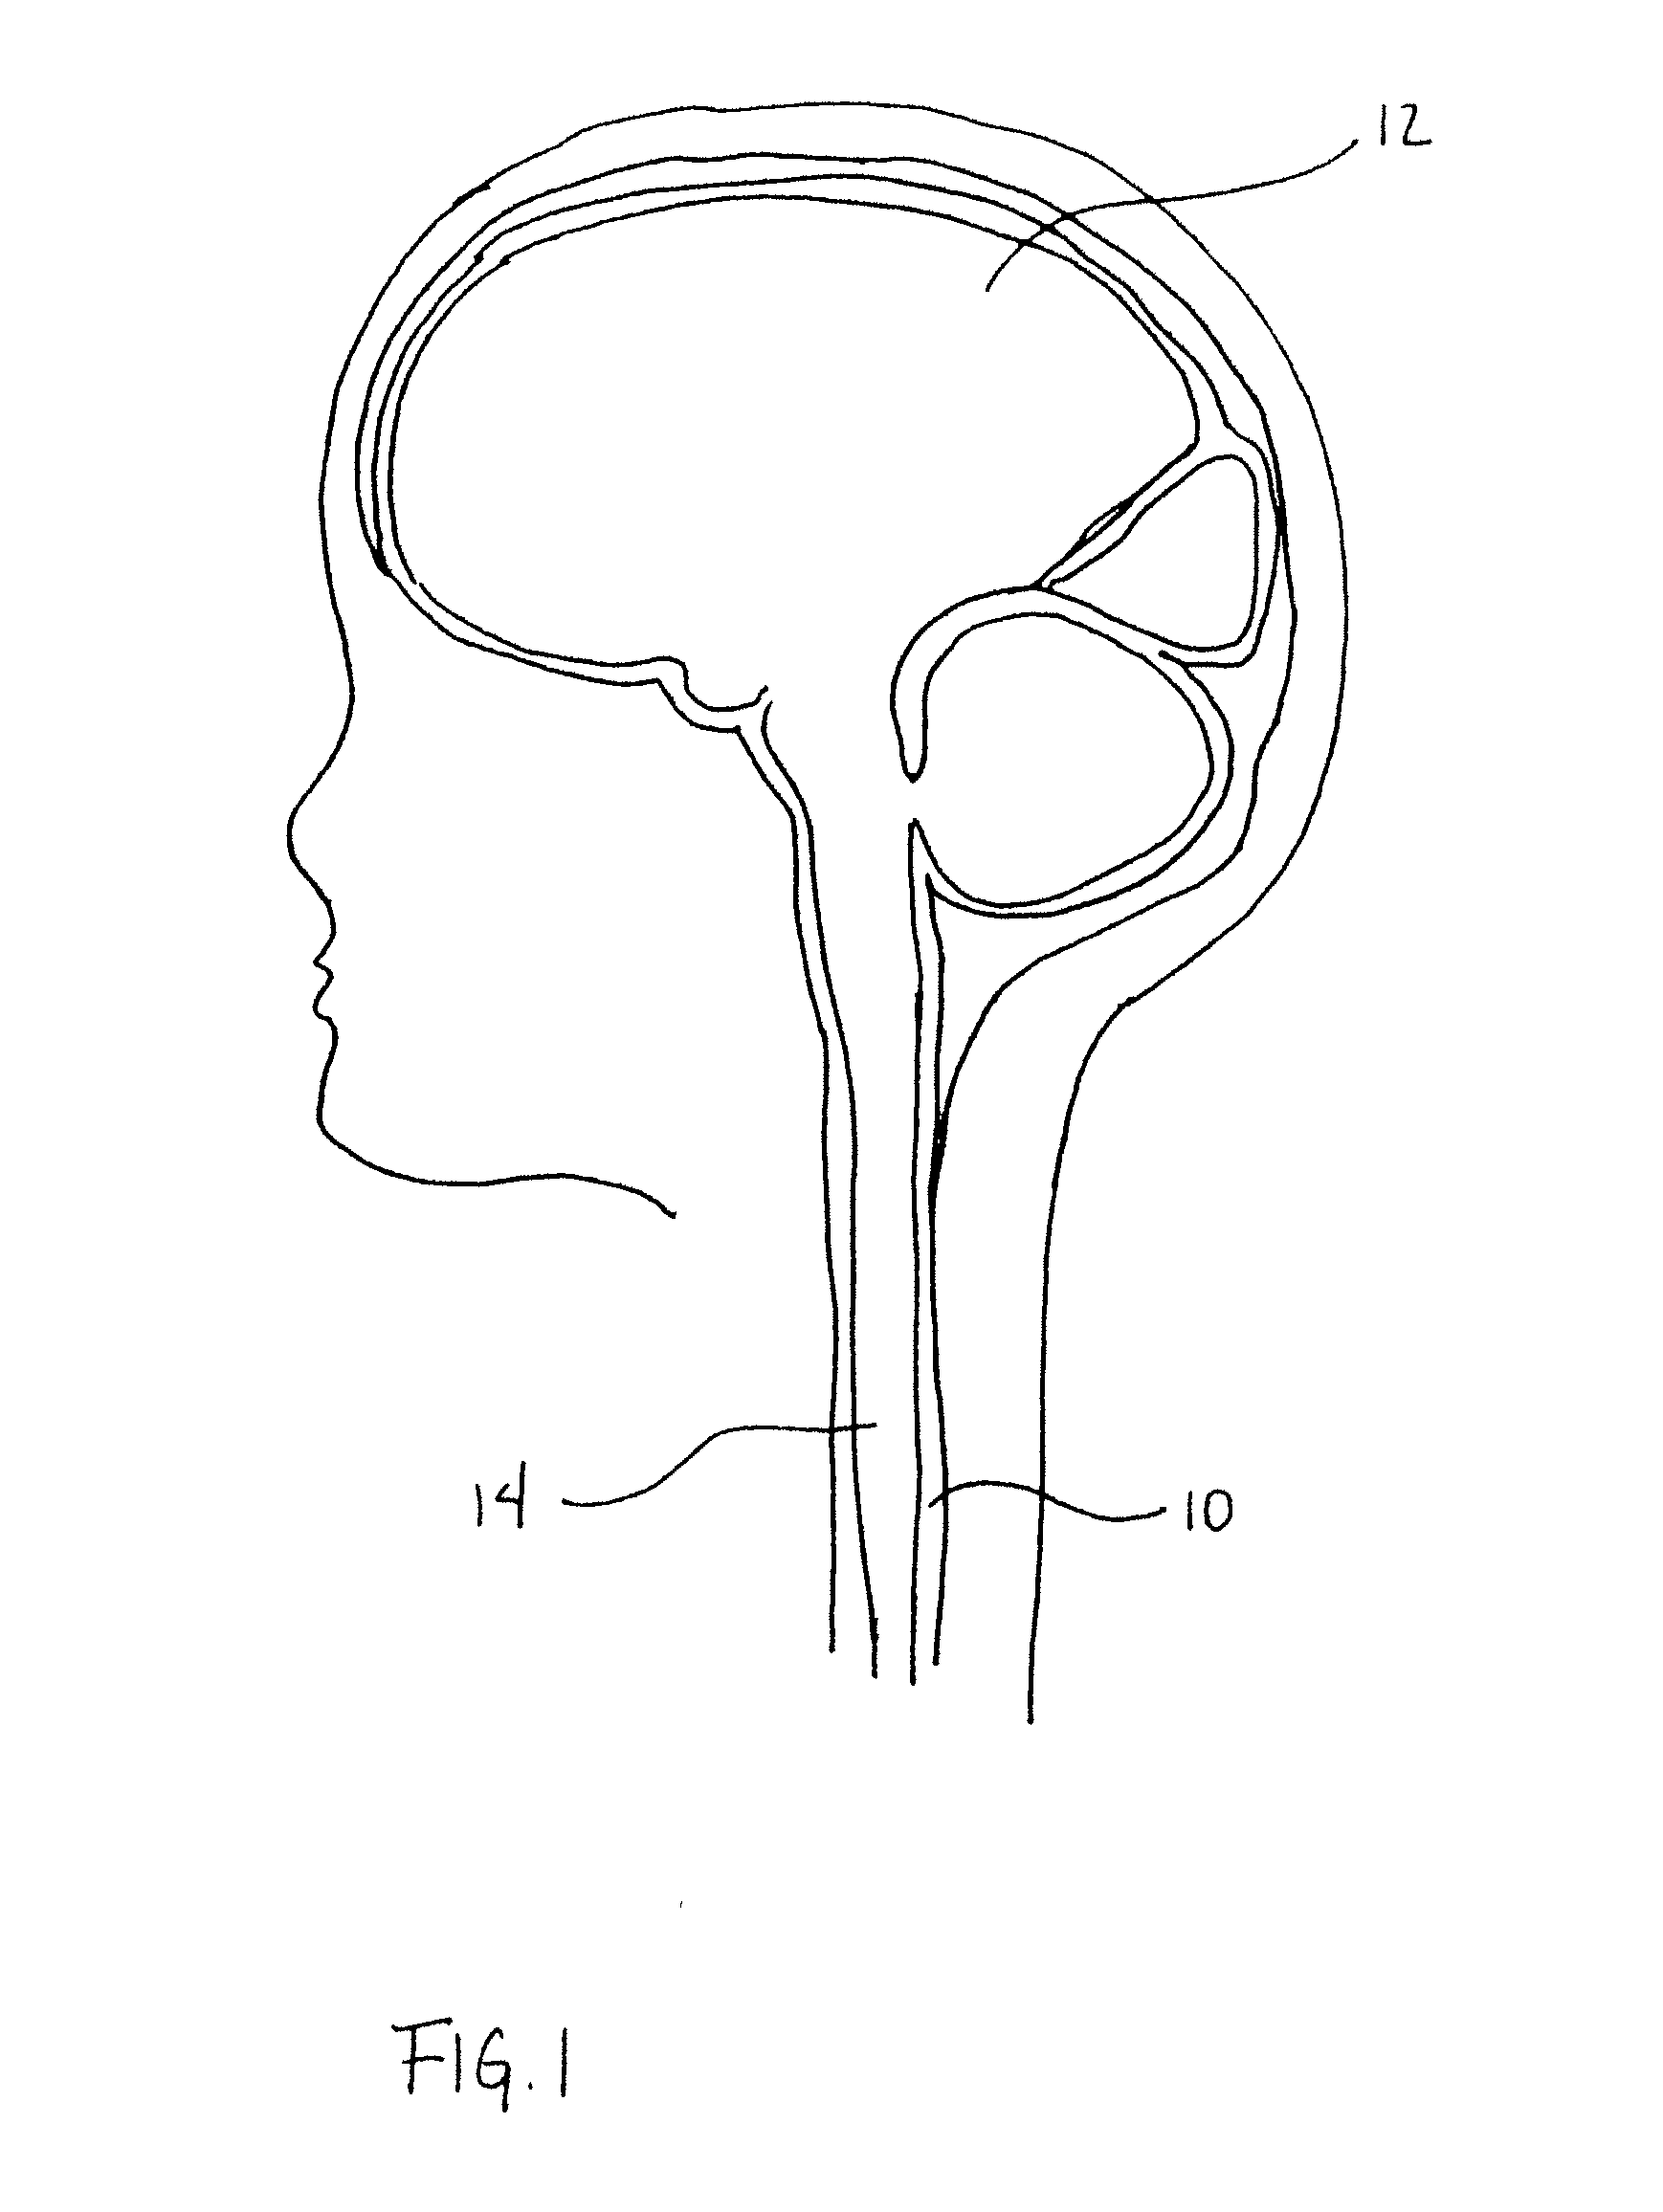 Bidirectional cerebral spinal fluid infusion catheter with cooling mechanism and method of use